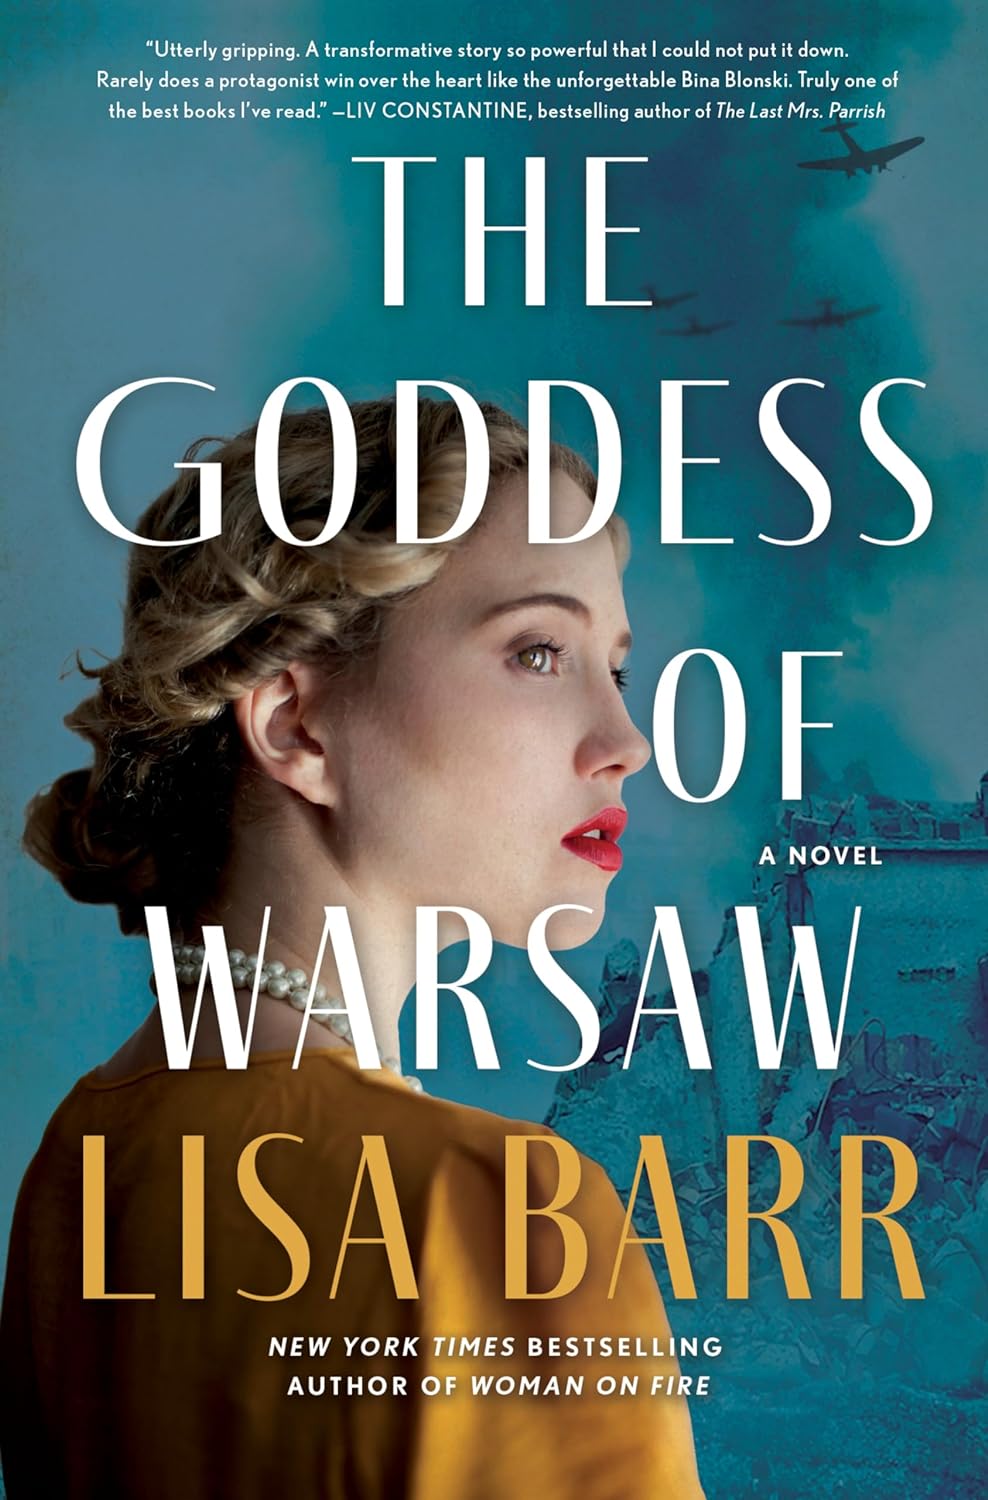 Image for "The Goddess of Warsaw"